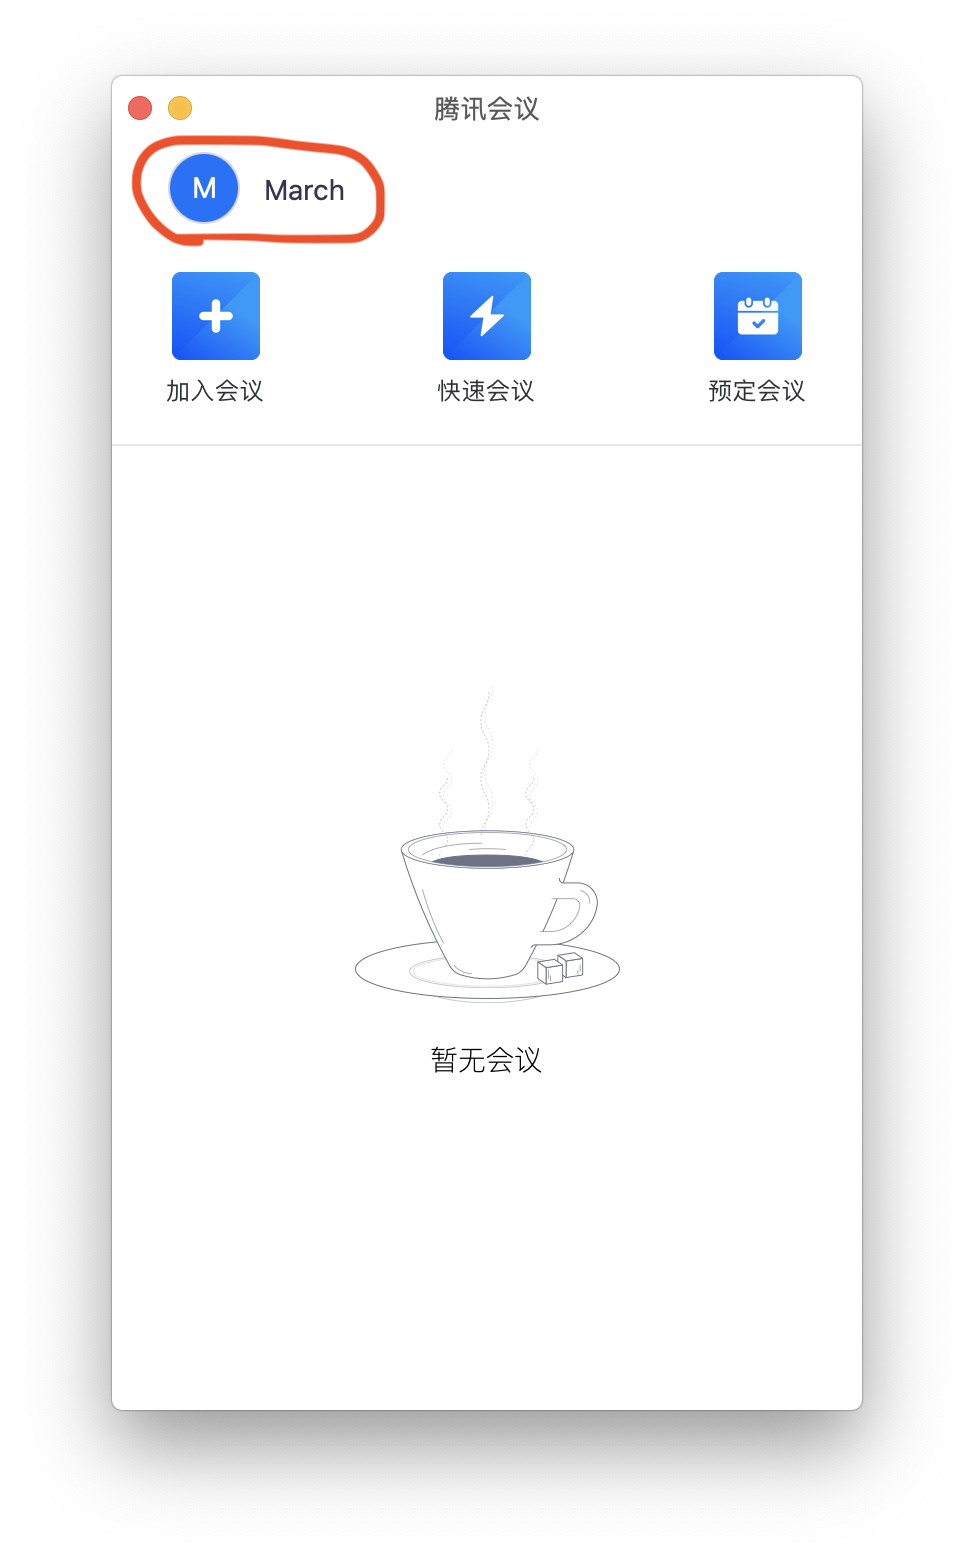 Tencent Meeting Home Interface